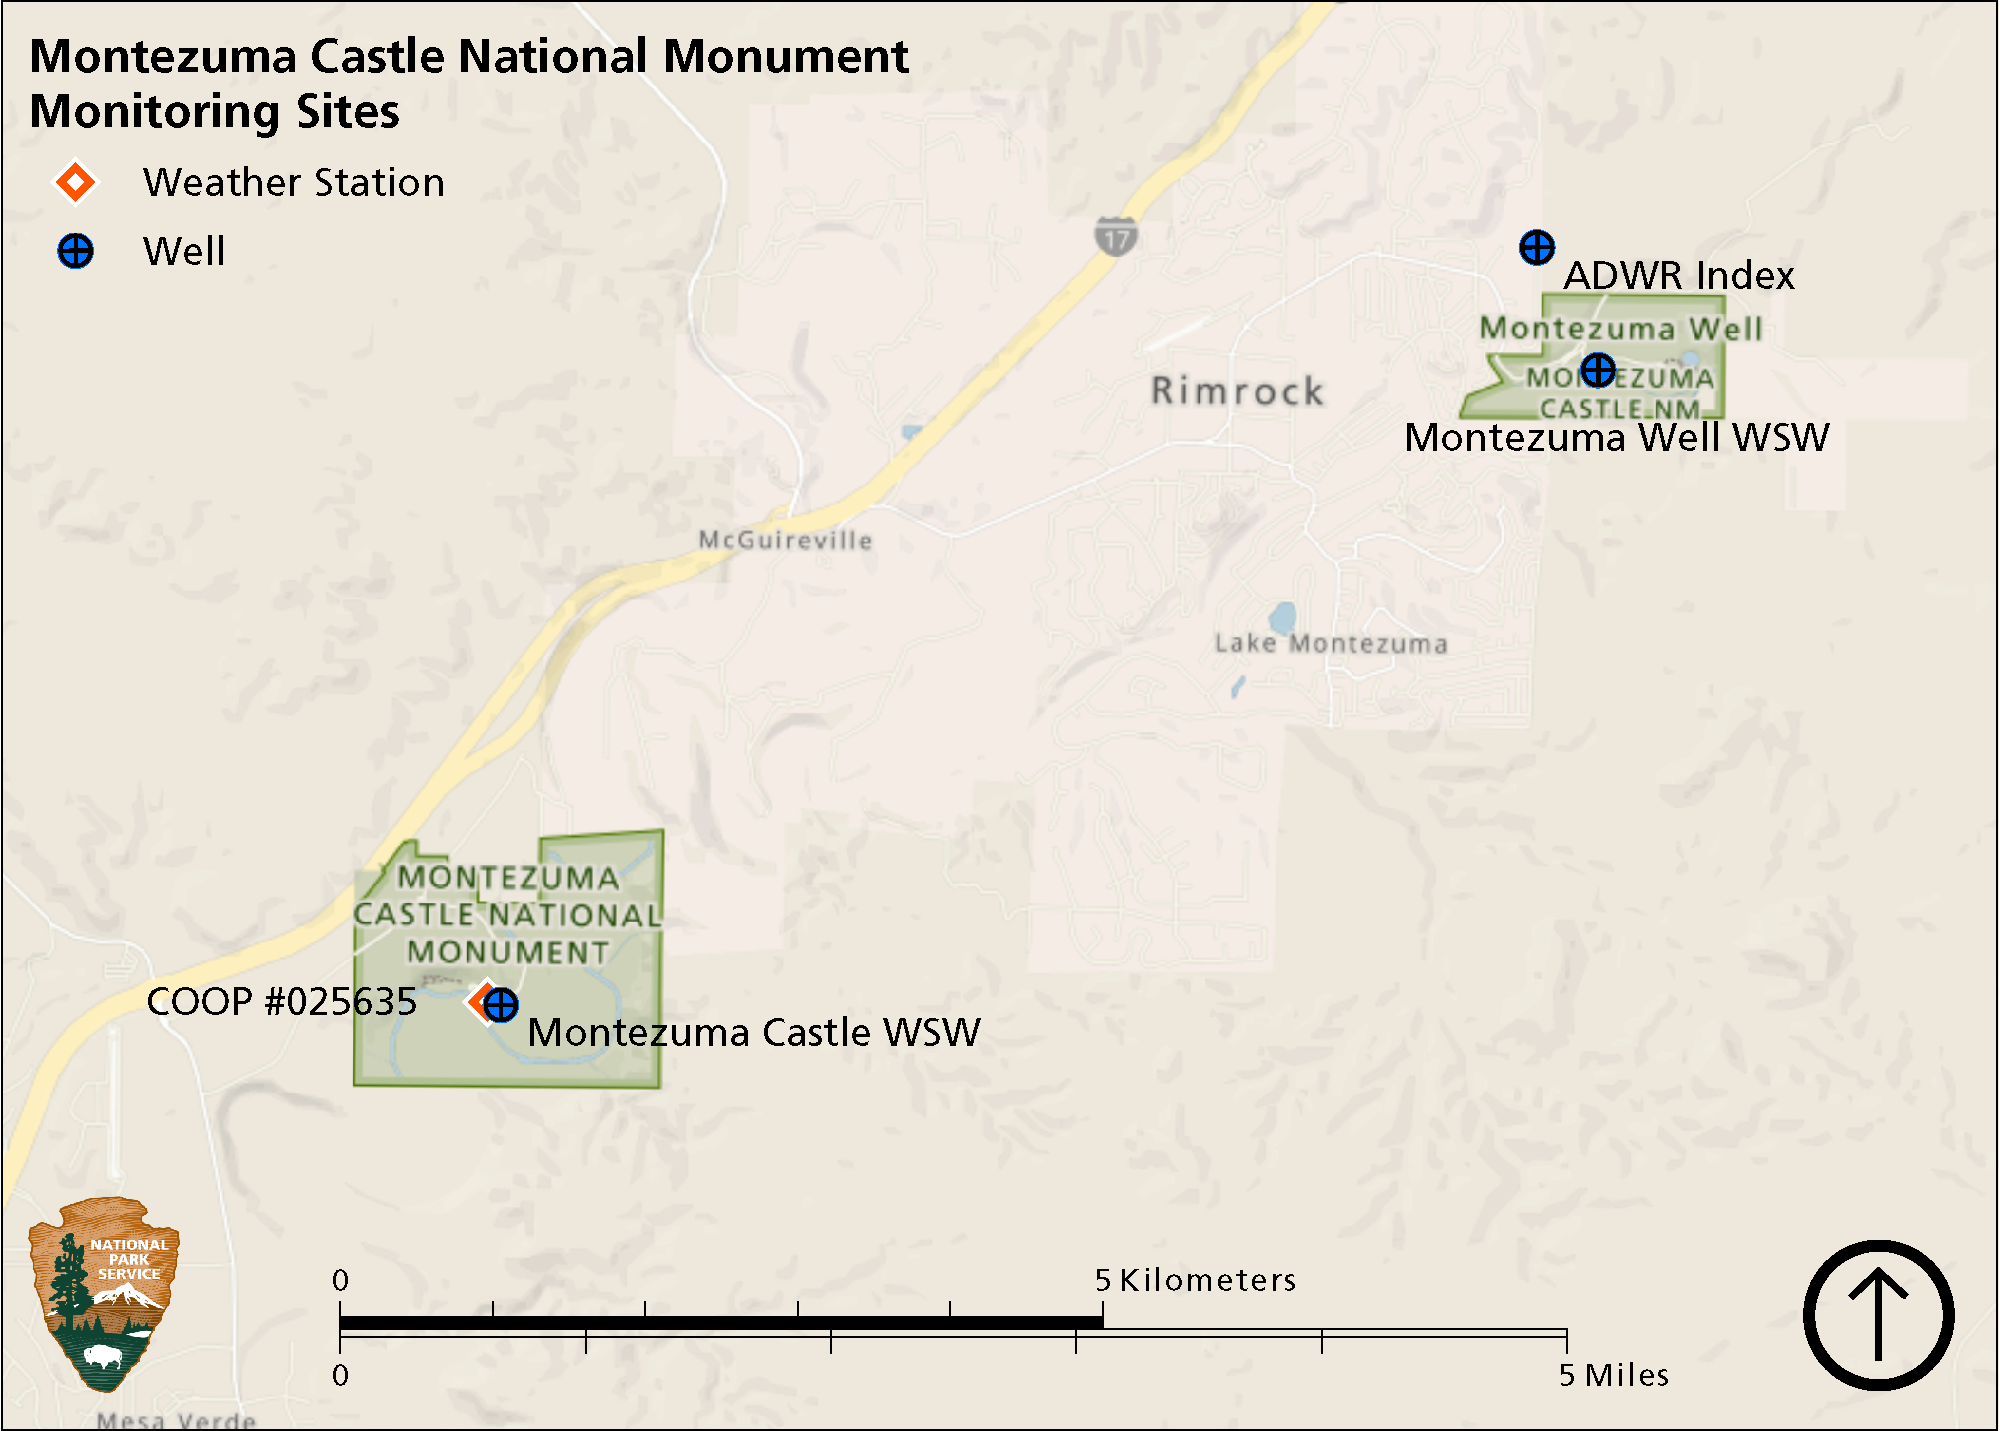 Map of Montezuma Castle National Monument showing location of weather station in the Southwest park unit and the groundwater monitoring wells in both park units.